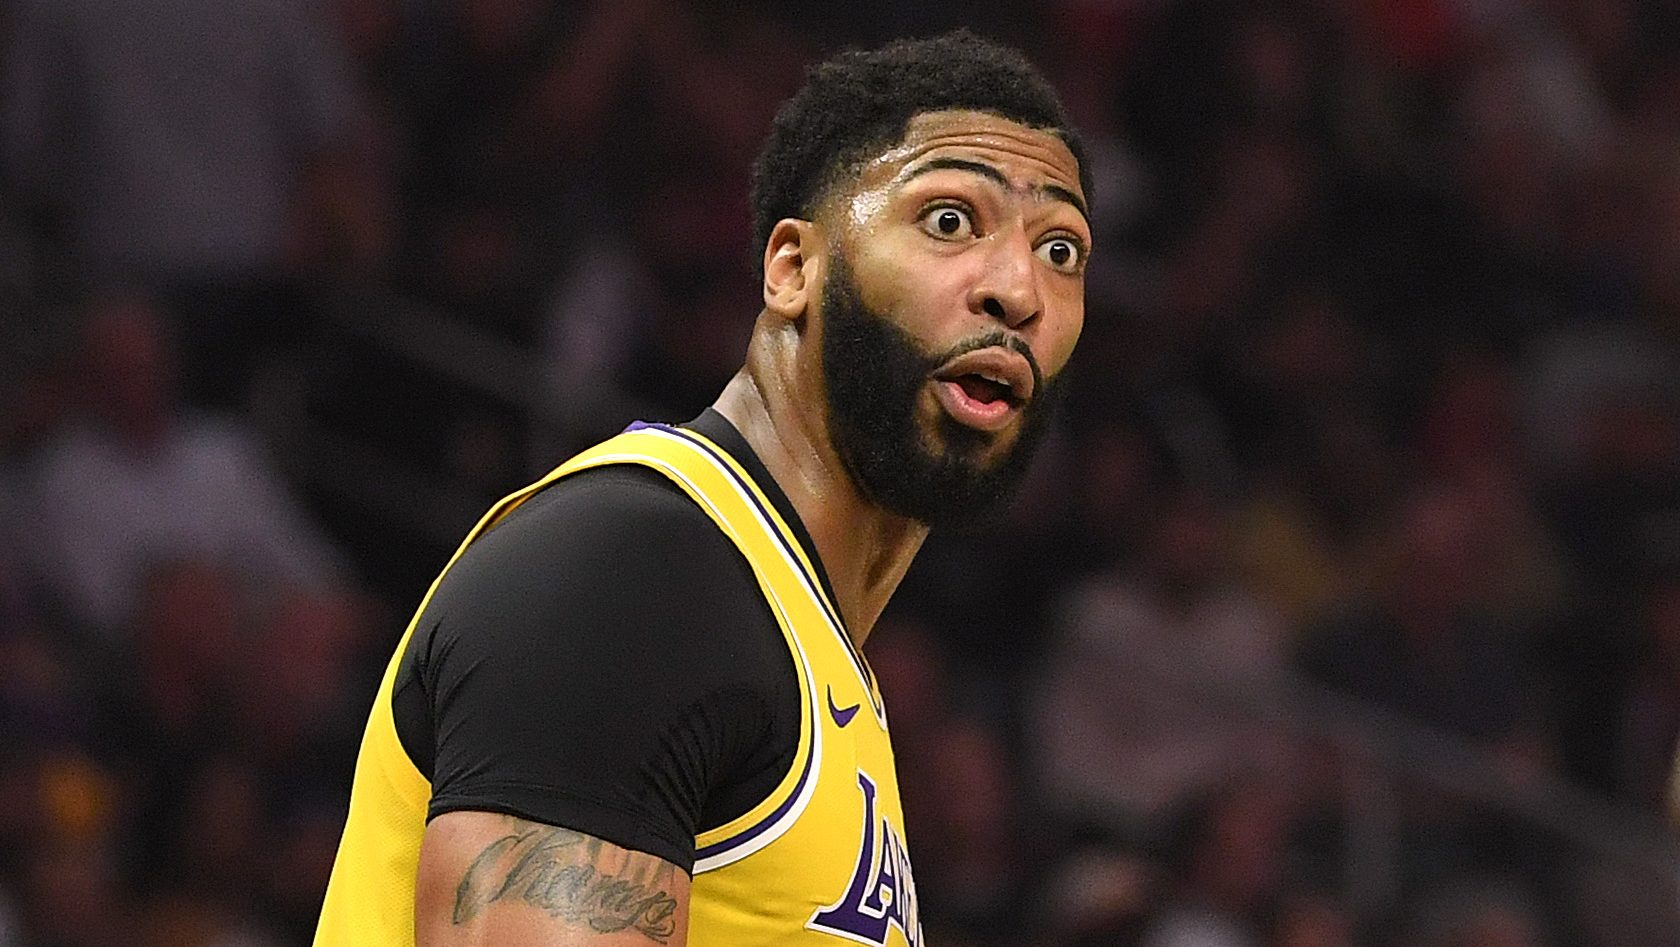 Lakers News: Anthony Davis Not Upset At Being Left Off All-Star Team